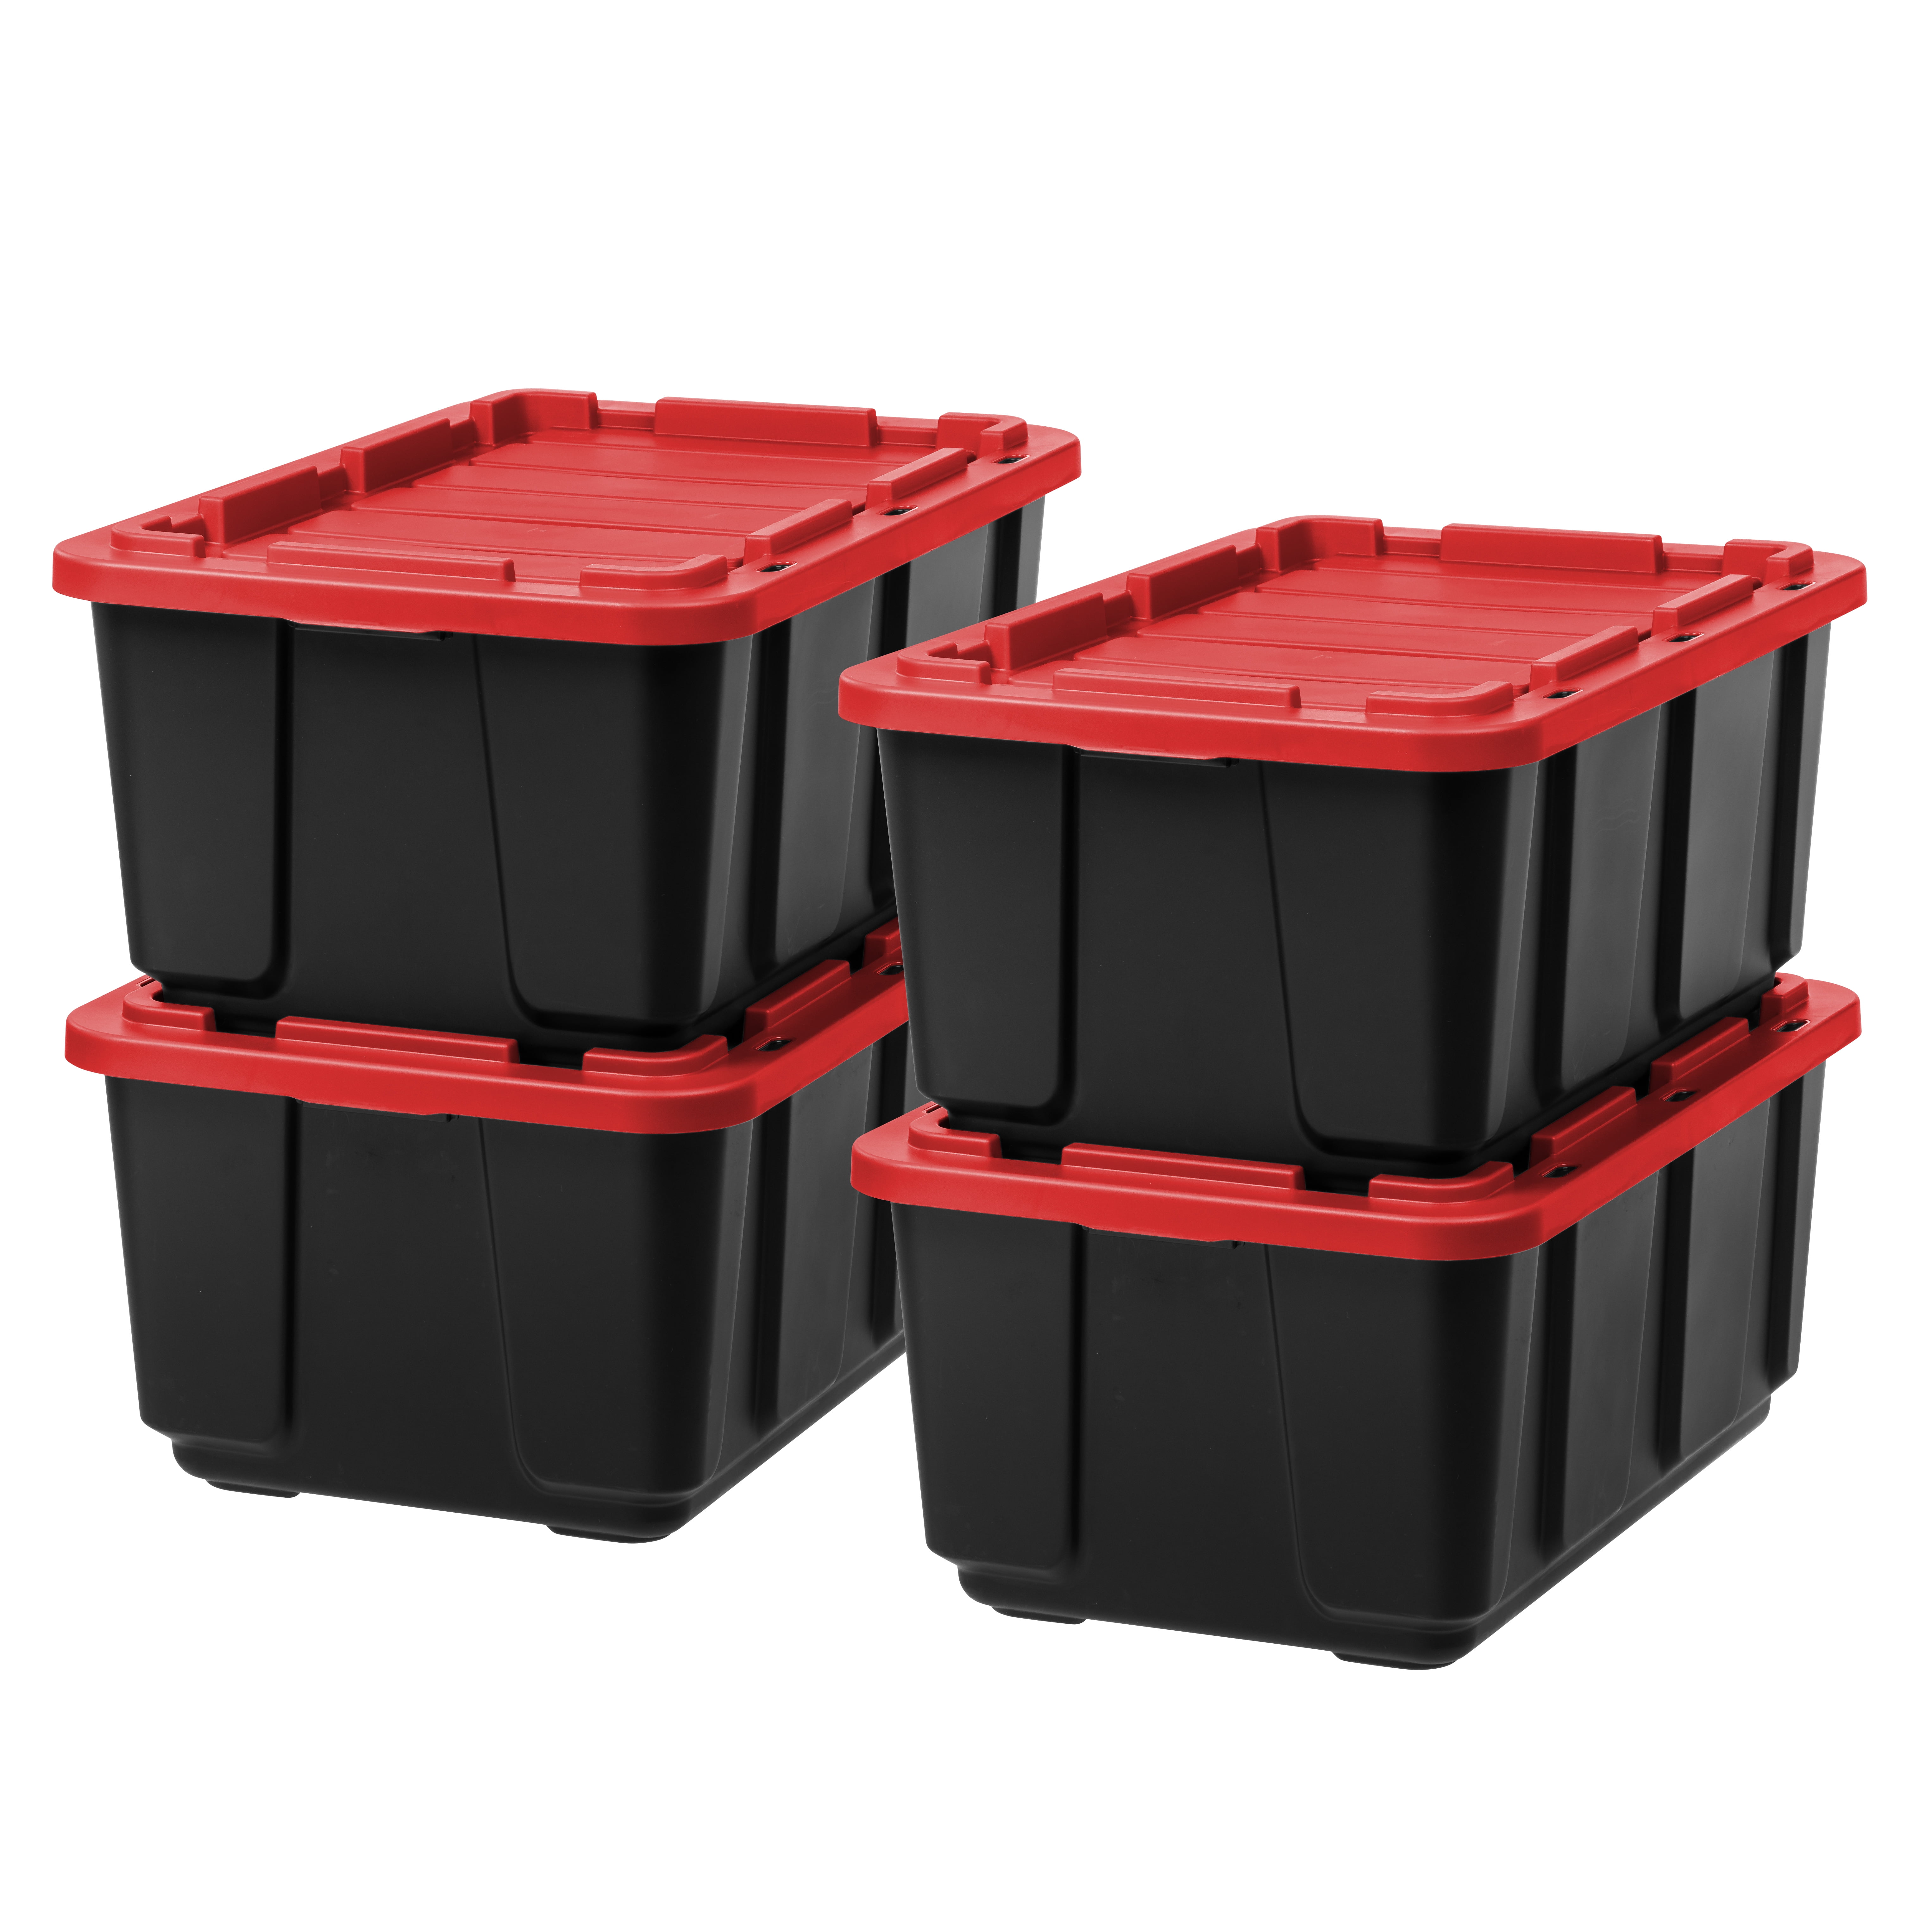 IRIS USA 27 Gallon Large Heavy-Duty Storage Plastic Bin Tote Organizing  Container with Durable Lid, Black/Red, 4 Pack - AliExpress